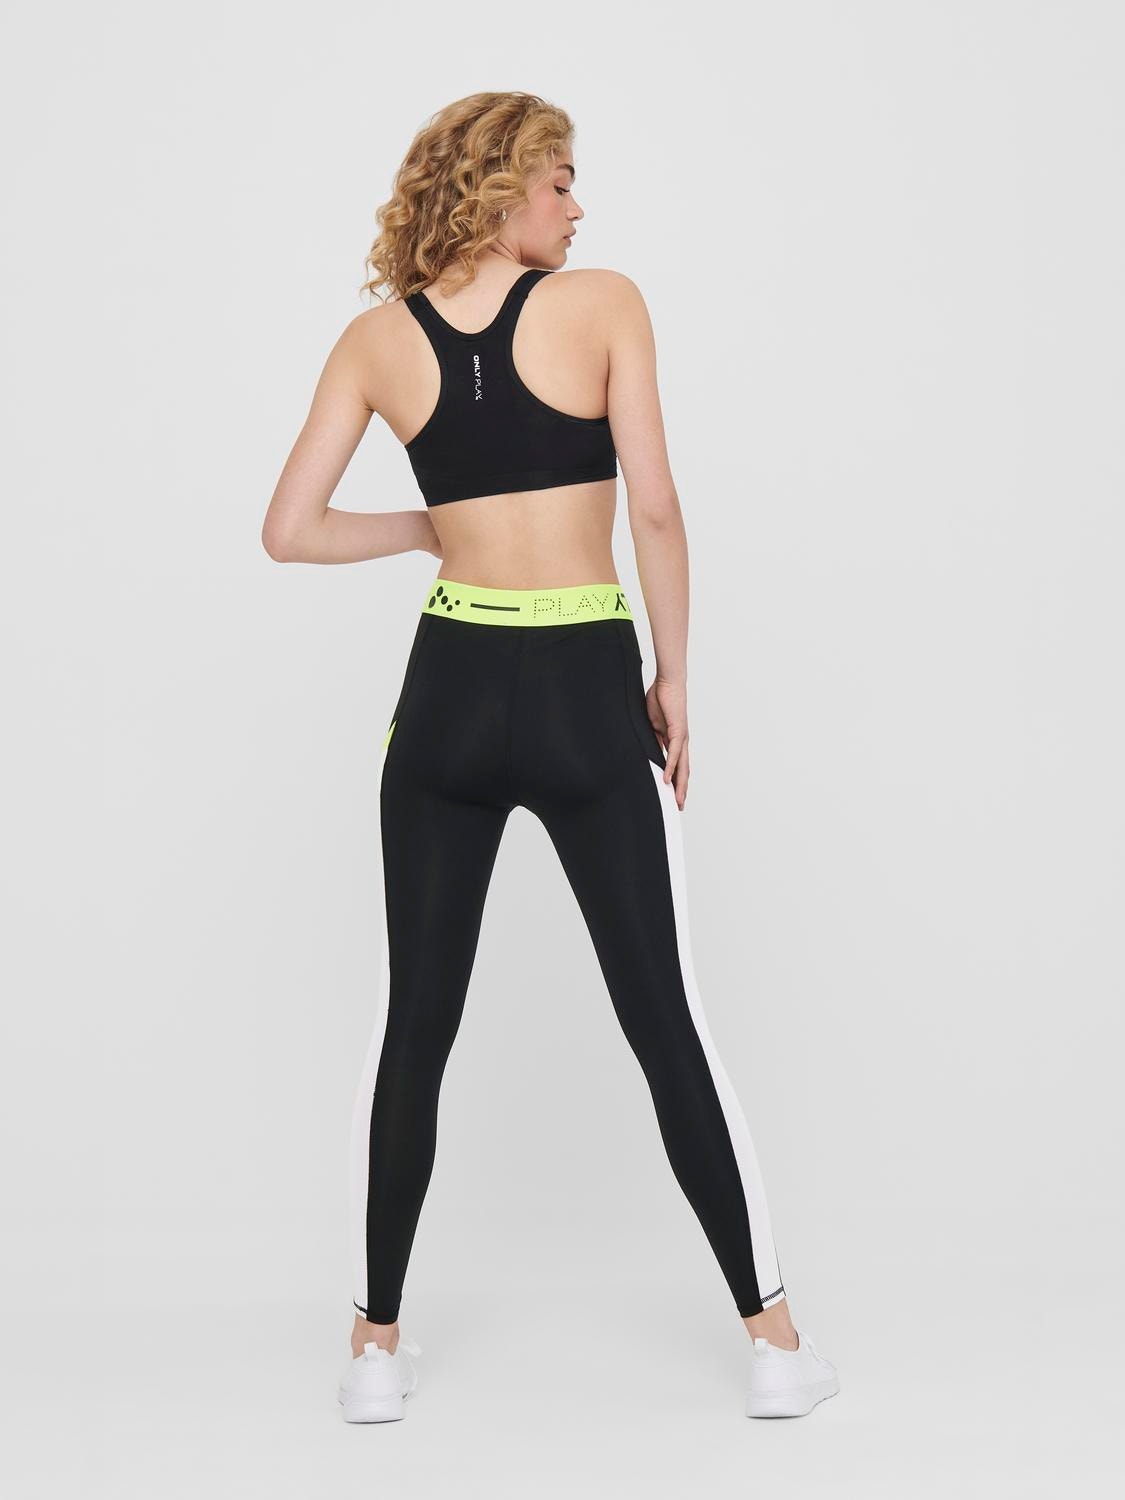 ONLY Seamless Sports-BH -Black - 15132244